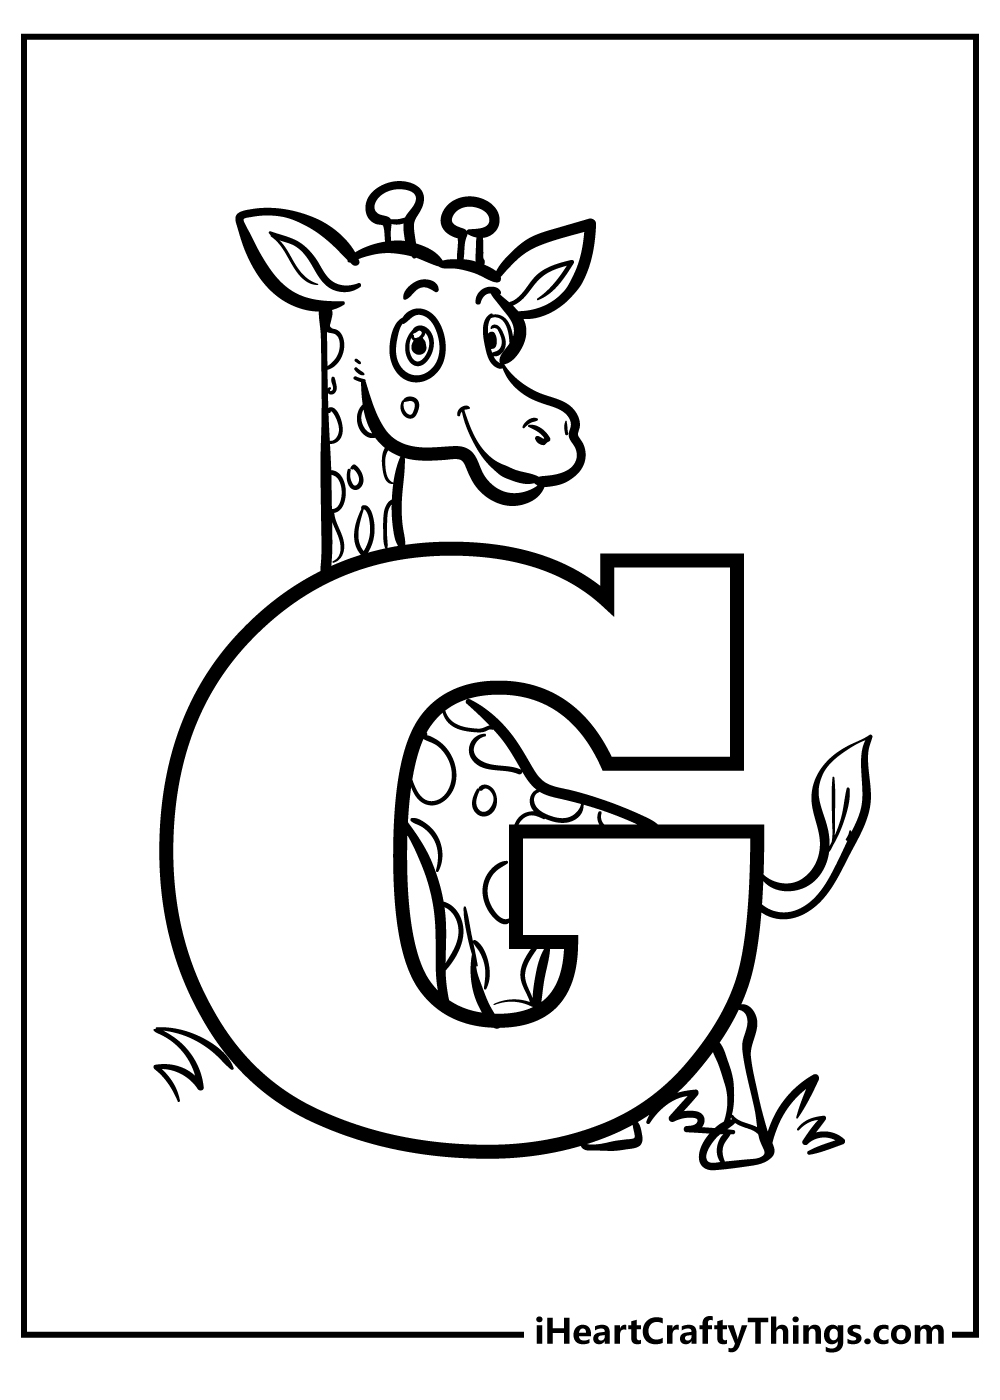 Letter G Coloring Book for adults free download